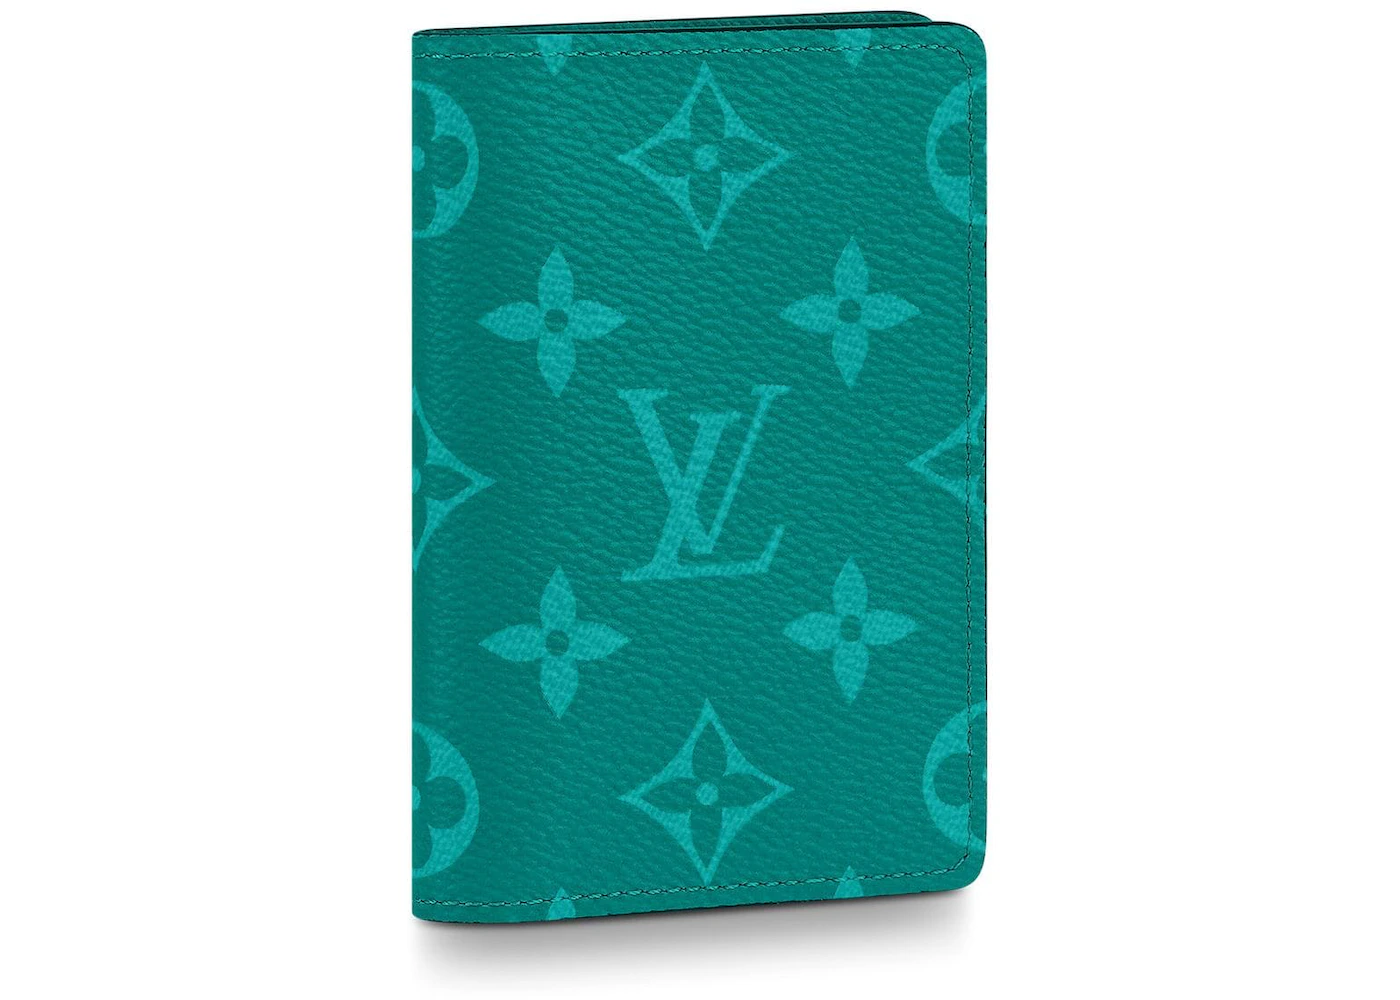 hire transaction Make dinner Louis Vuitton Pocket Organizer Monogram Amazon Taiga Pine Green in Taiga  Leather/Coated Canvas with Silver-tone